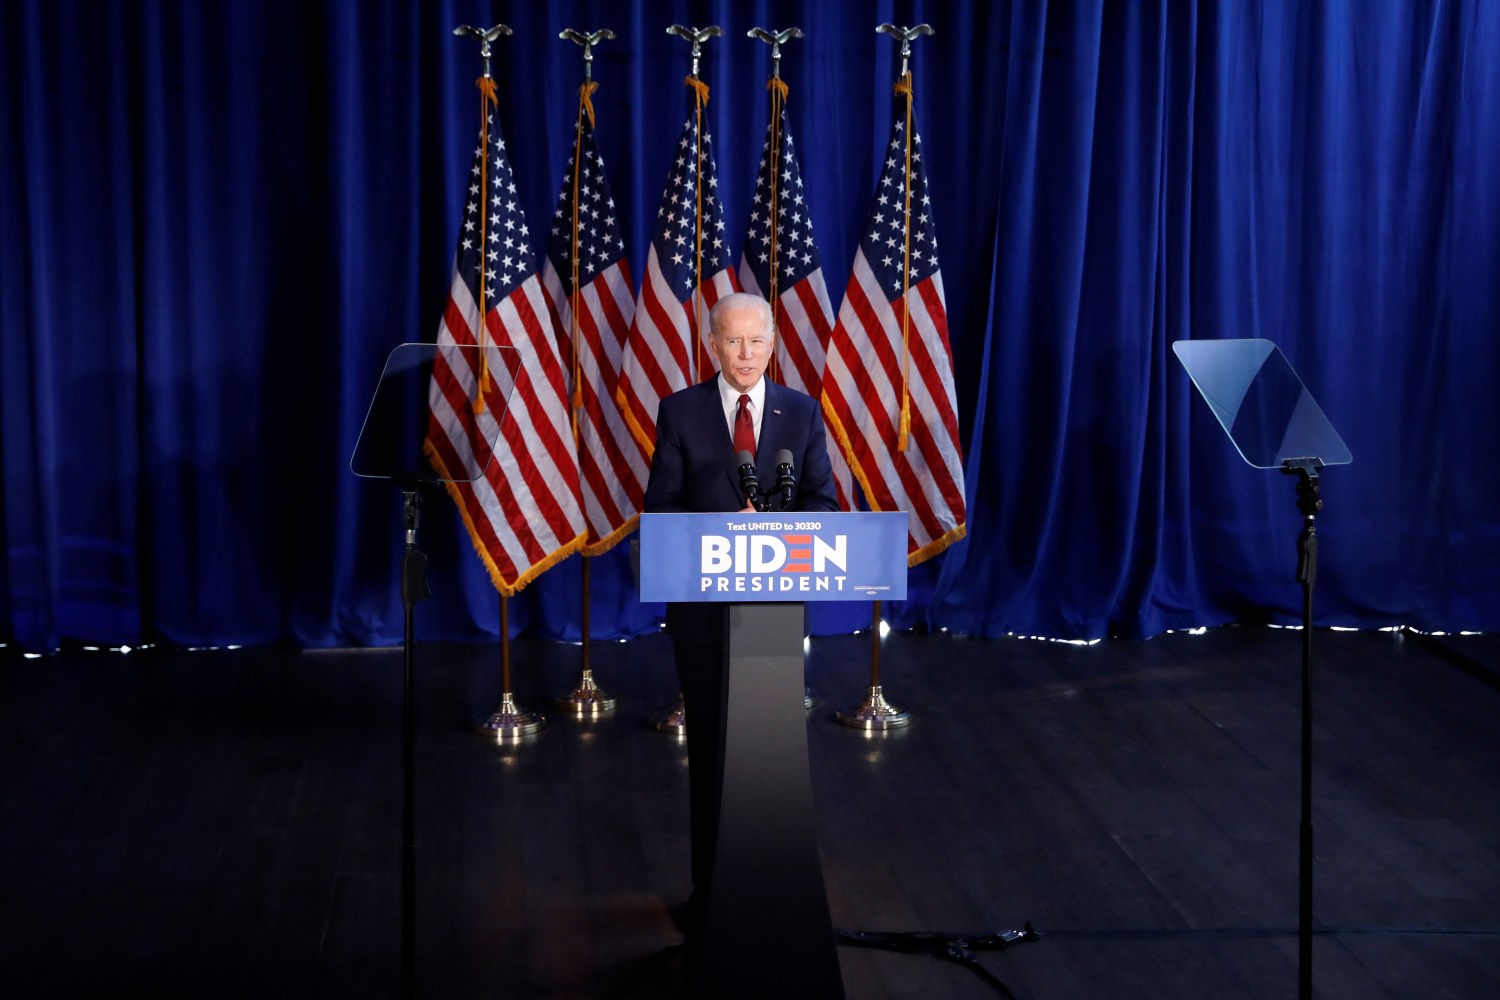 U.S. Democratic presidential candidate and former U.S. Vice President Joe Biden delivers a foreign policy address in Manhattan in New York City, New York, U.S., January 7, 2020. REUTERS/Brendan McDermid